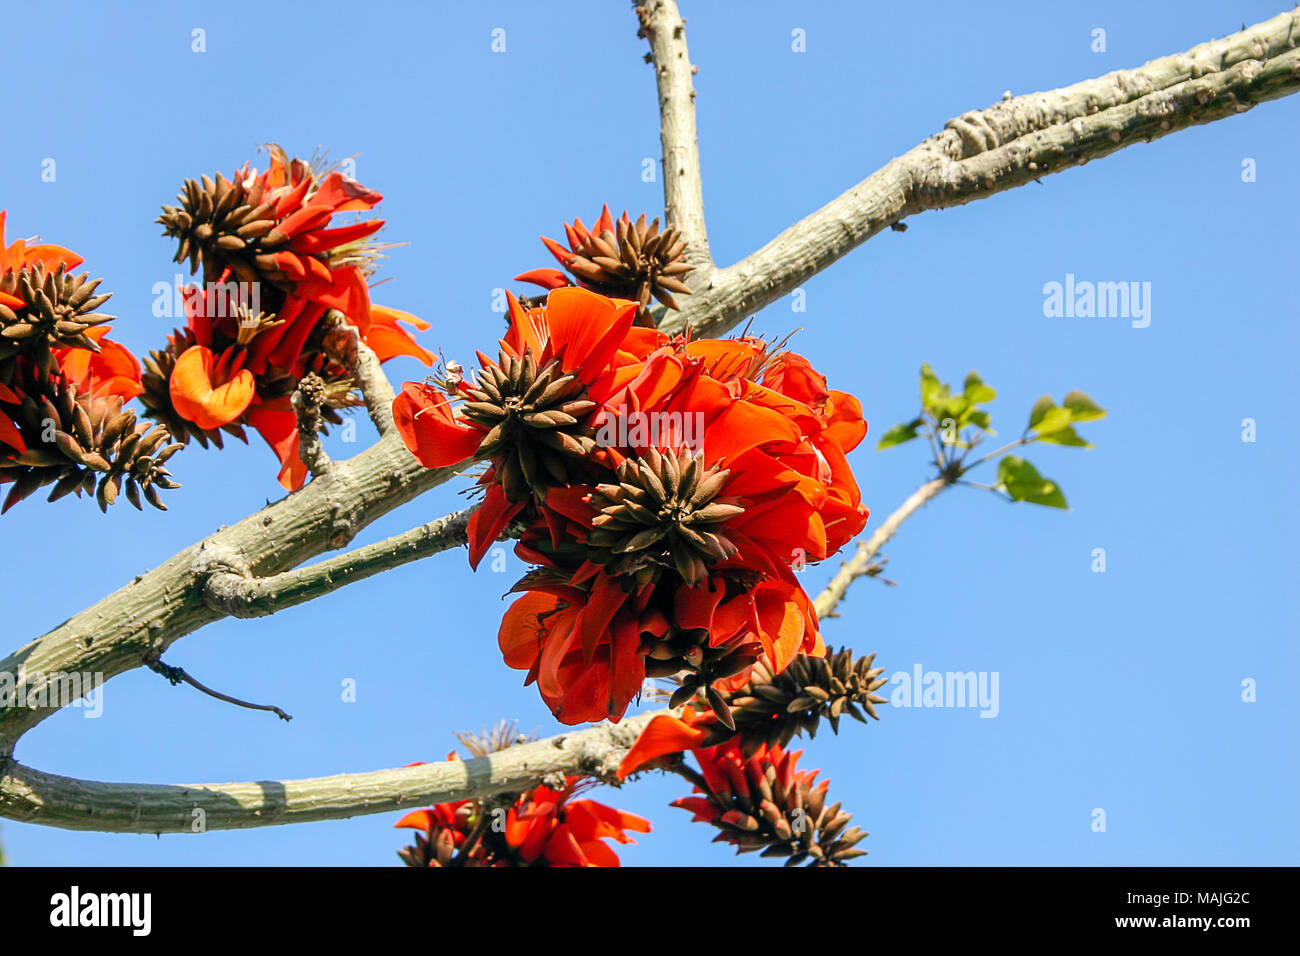 A flowering Erythrina caffra tree (Coral tree) is a a magnet for a wide variety of birds that utilise the nectar, blossoms, seed and visiting insects. Stock Photo